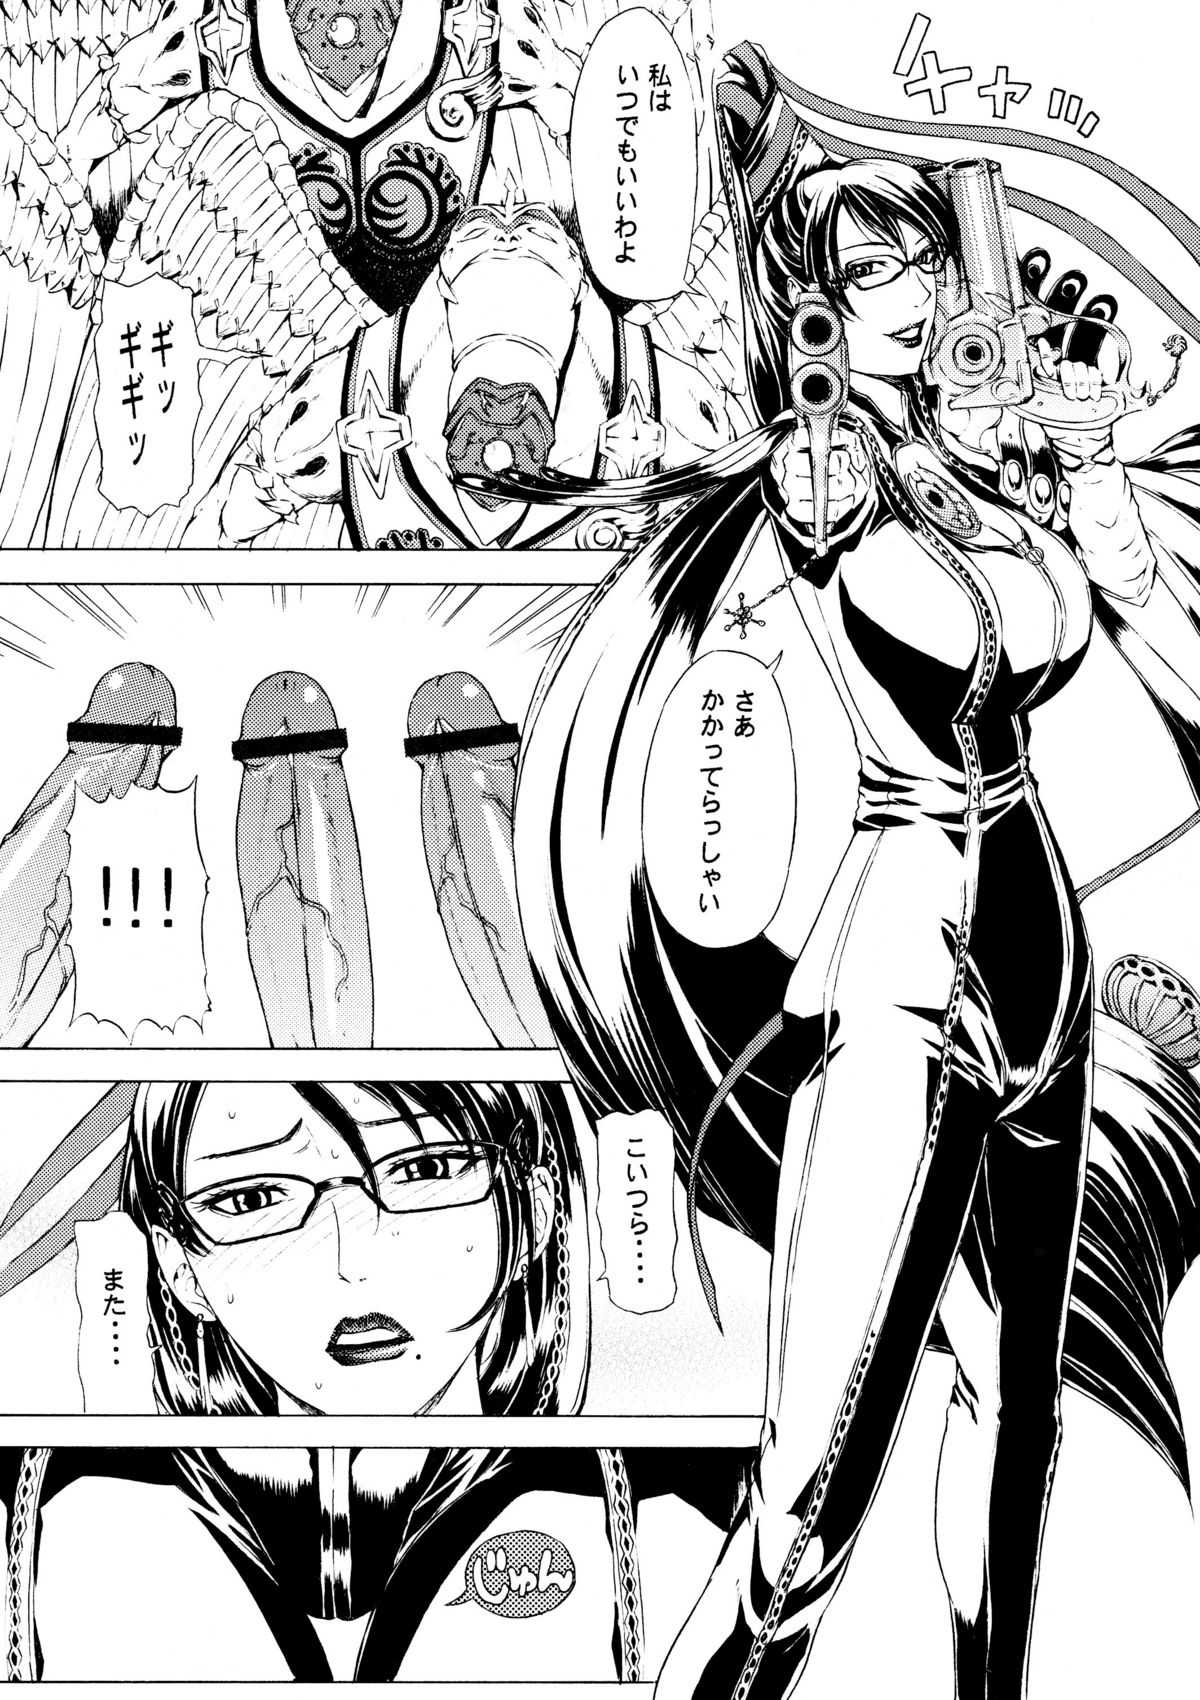 (C79) [Chrono Mail (Tokie Hirohito)] Witch Time (Bayonetta) (C79) [クロノ・メール (刻江尋人)] Witch Time (ベヨネッタ)